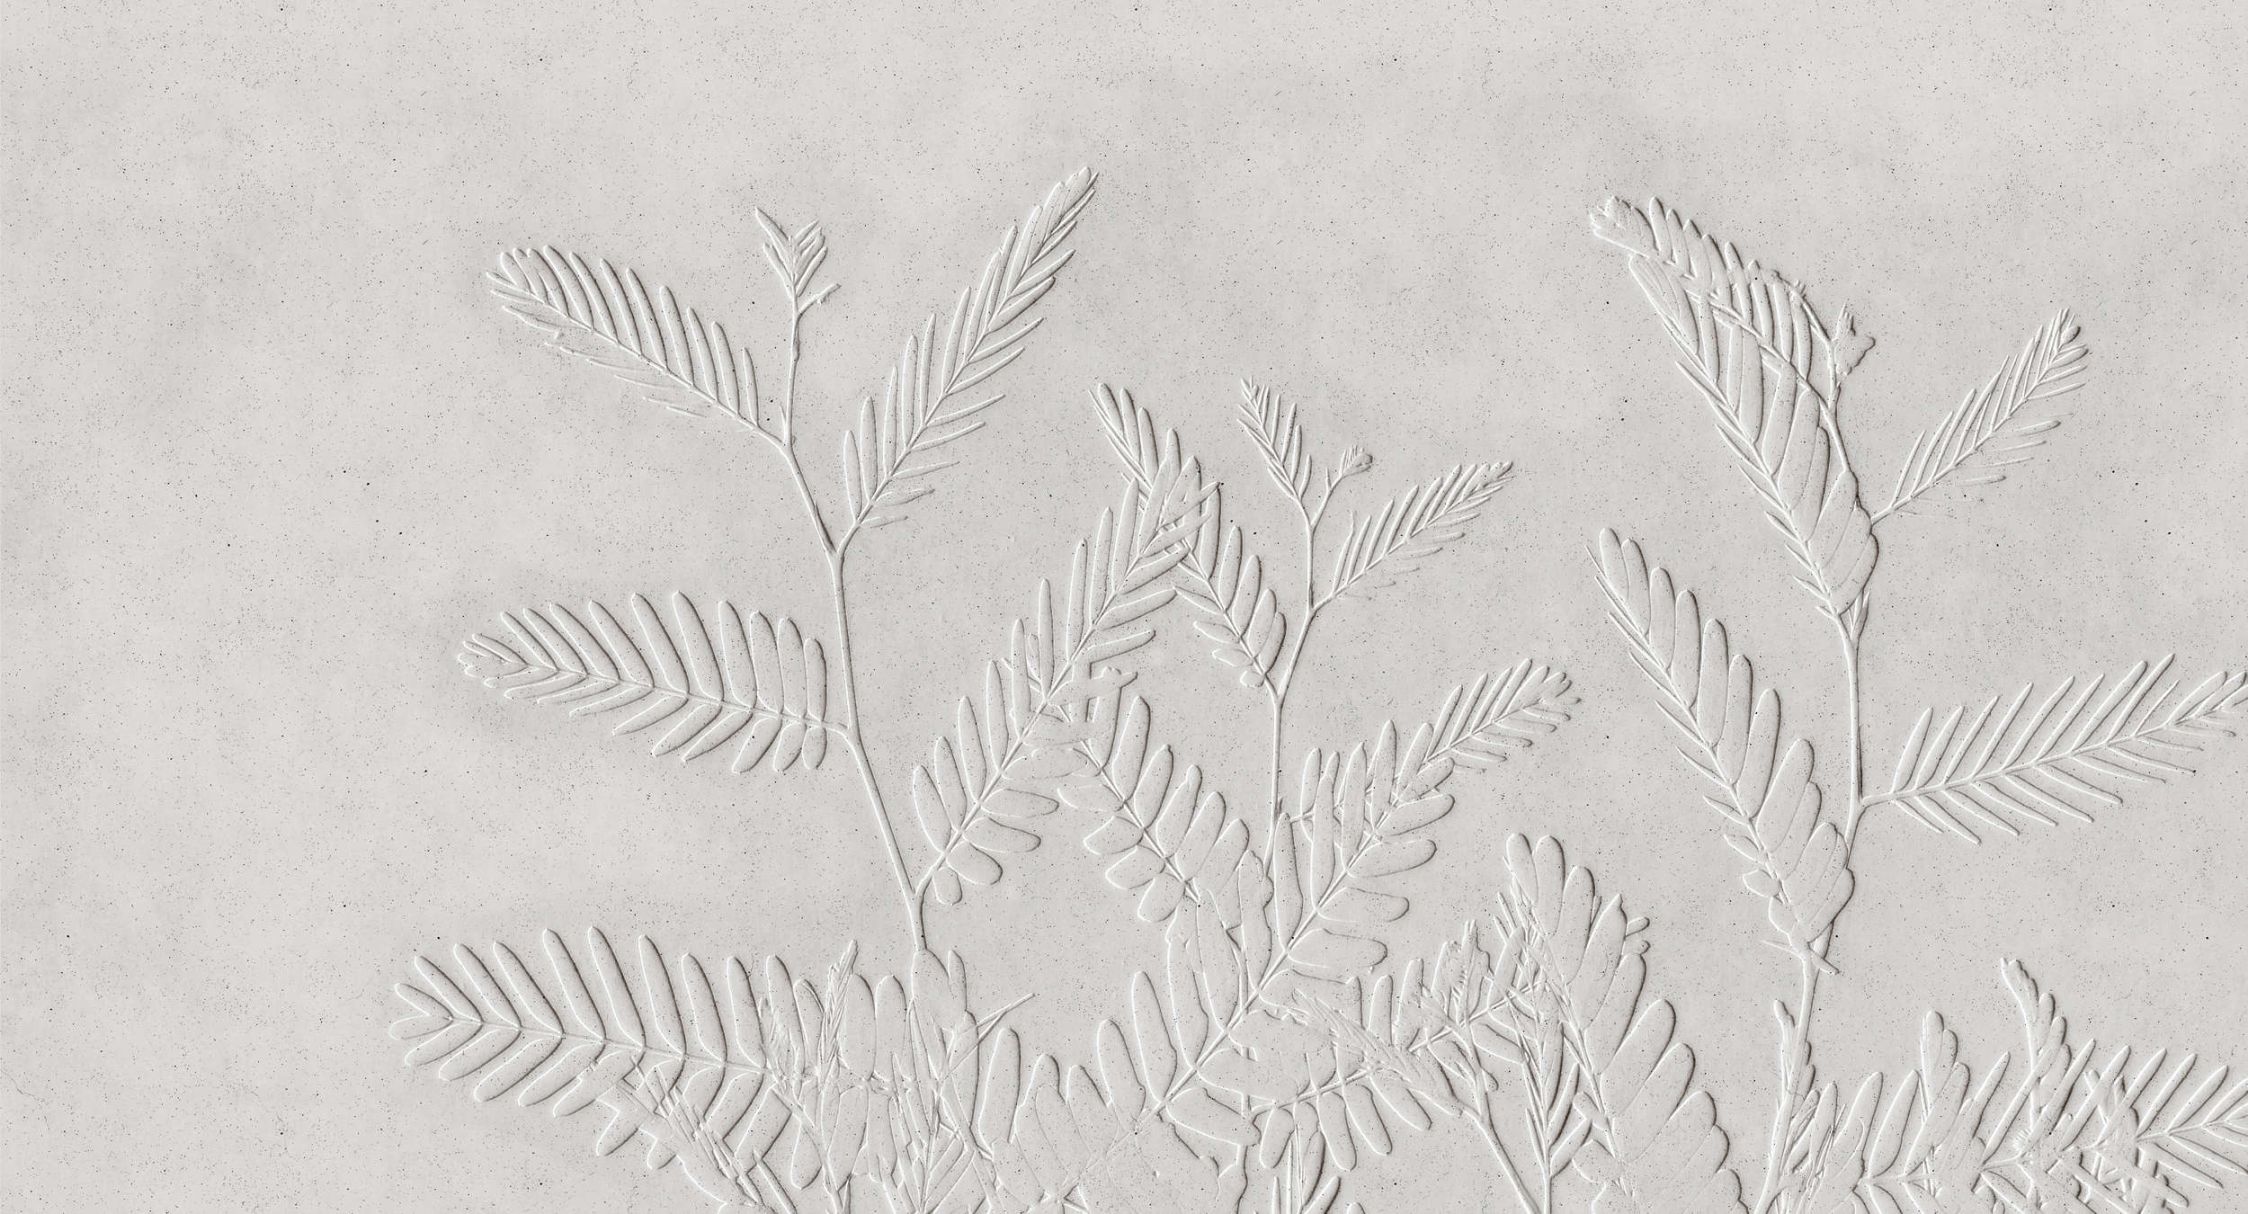             Photo wallpaper »far« - fern leaves in front of concrete plaster texture - light | matt, smooth non-woven fabric
        